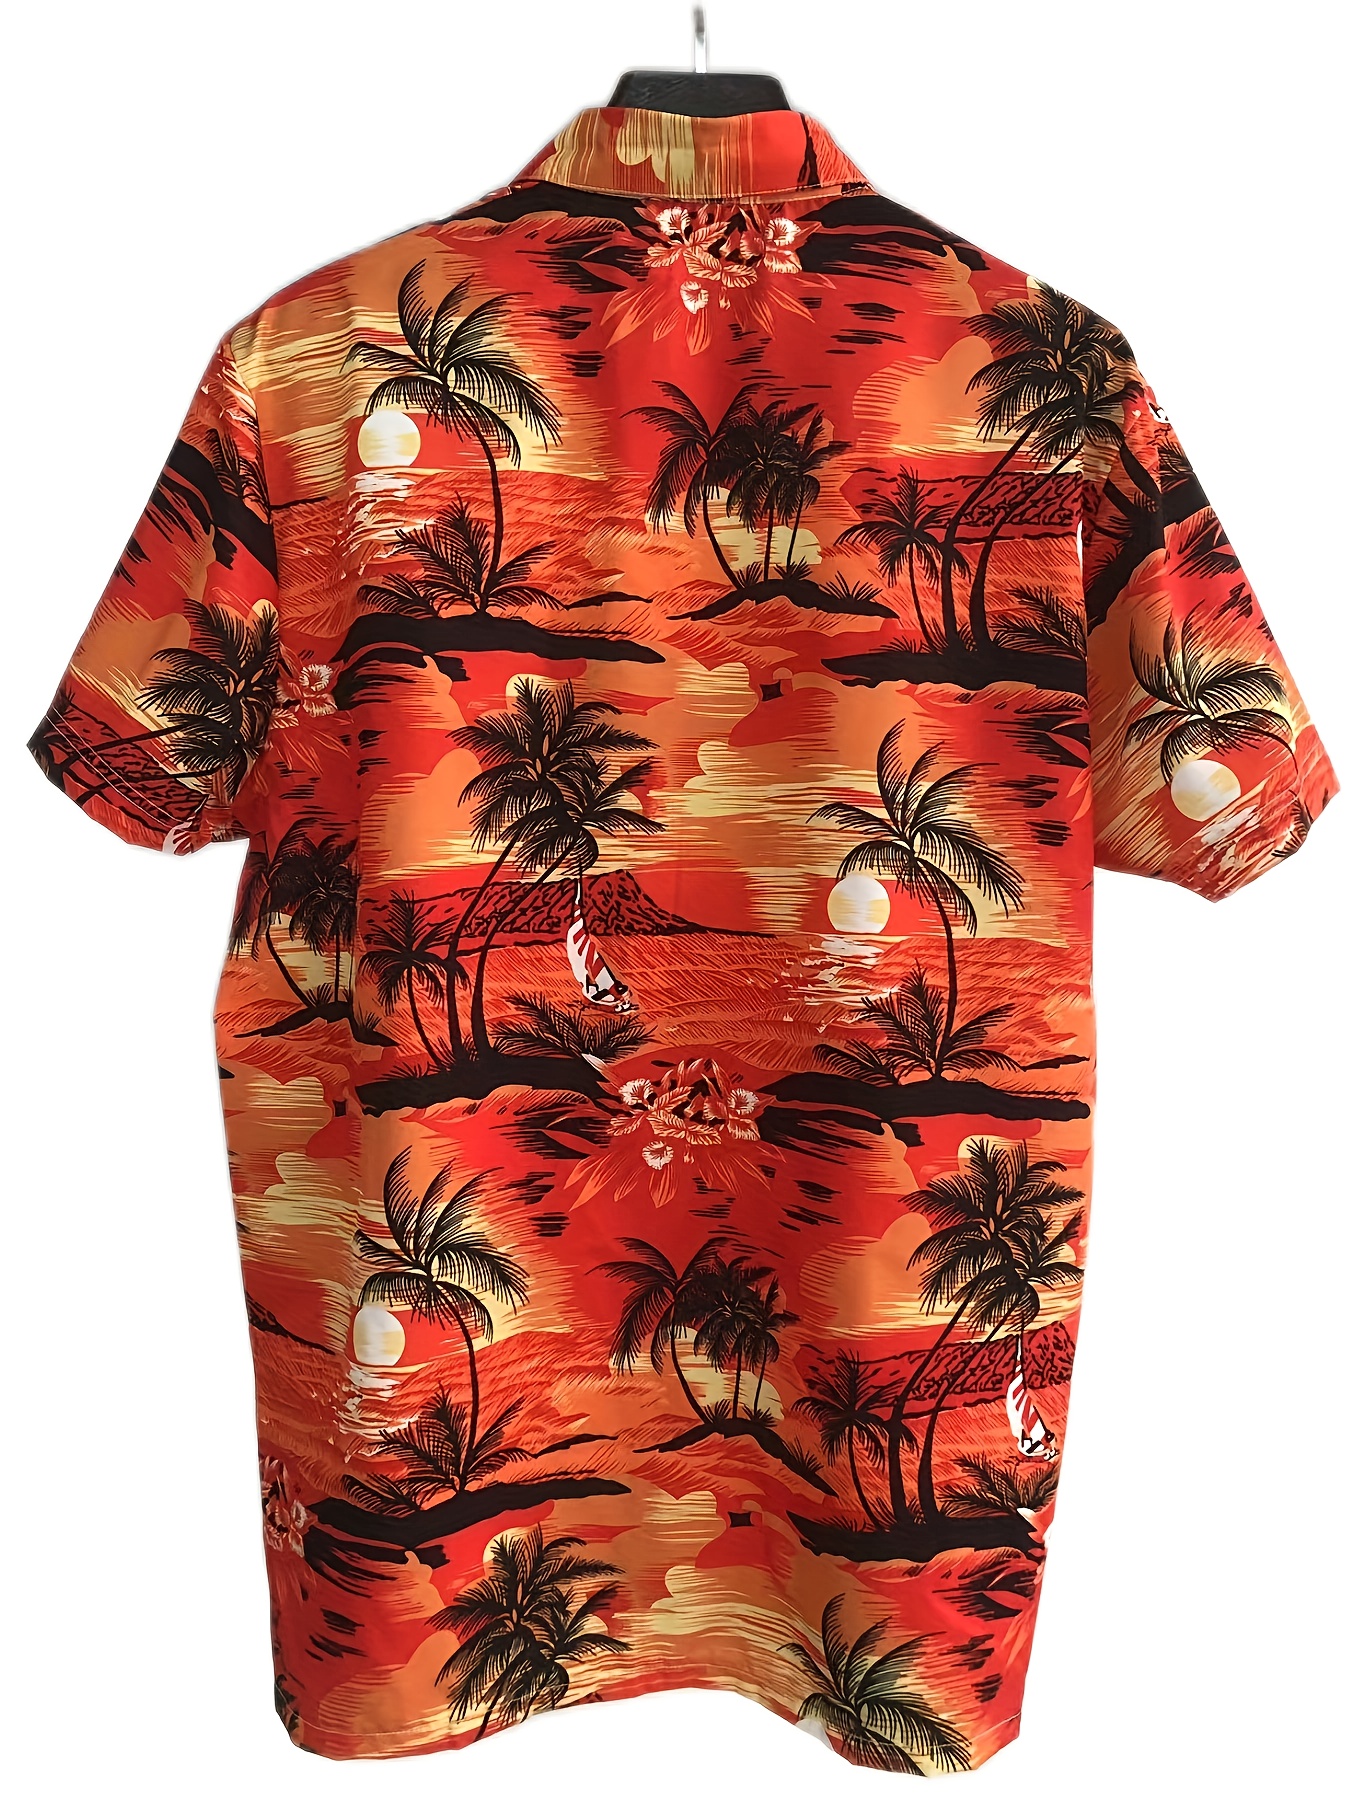 mens hawaiian shirt tropical island pattern short sleeves casual button up for vacation and beach resorts details 0